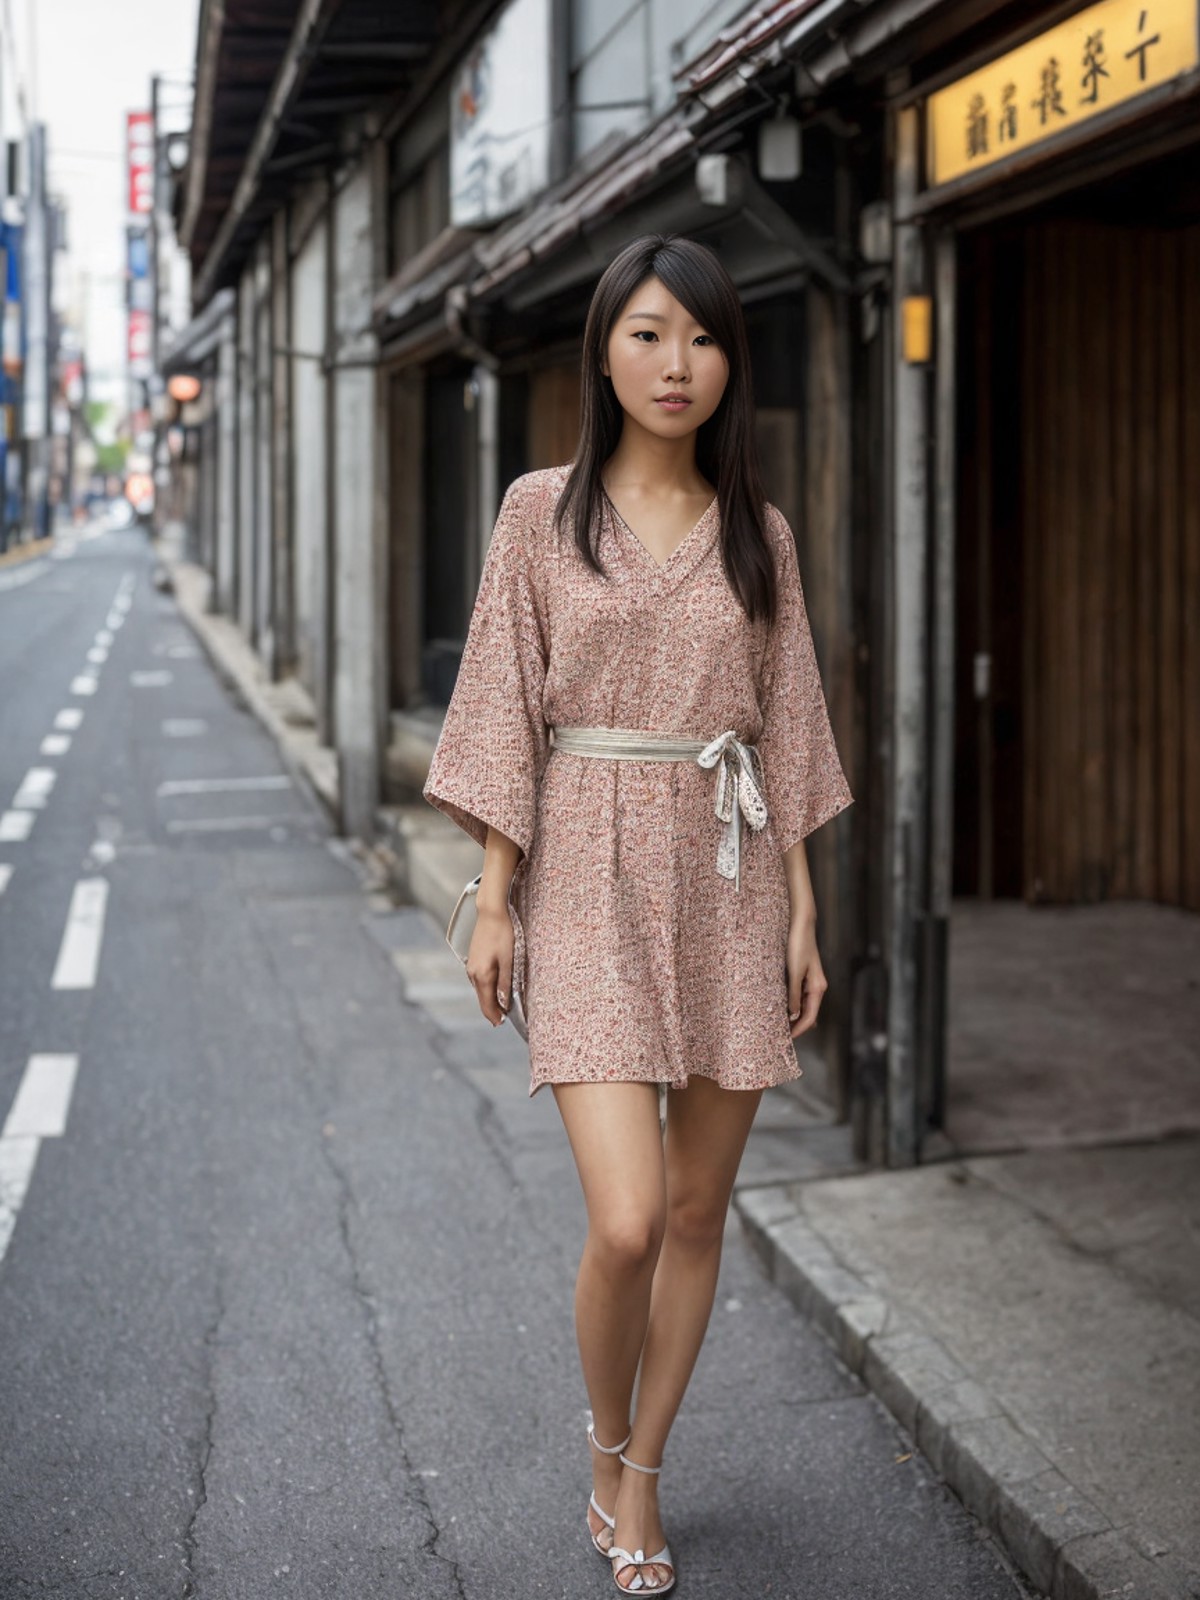 leica_style,((full body photo of one japanese woman)),dress,street,night,masterpiece, best quality,super detailed, high re...